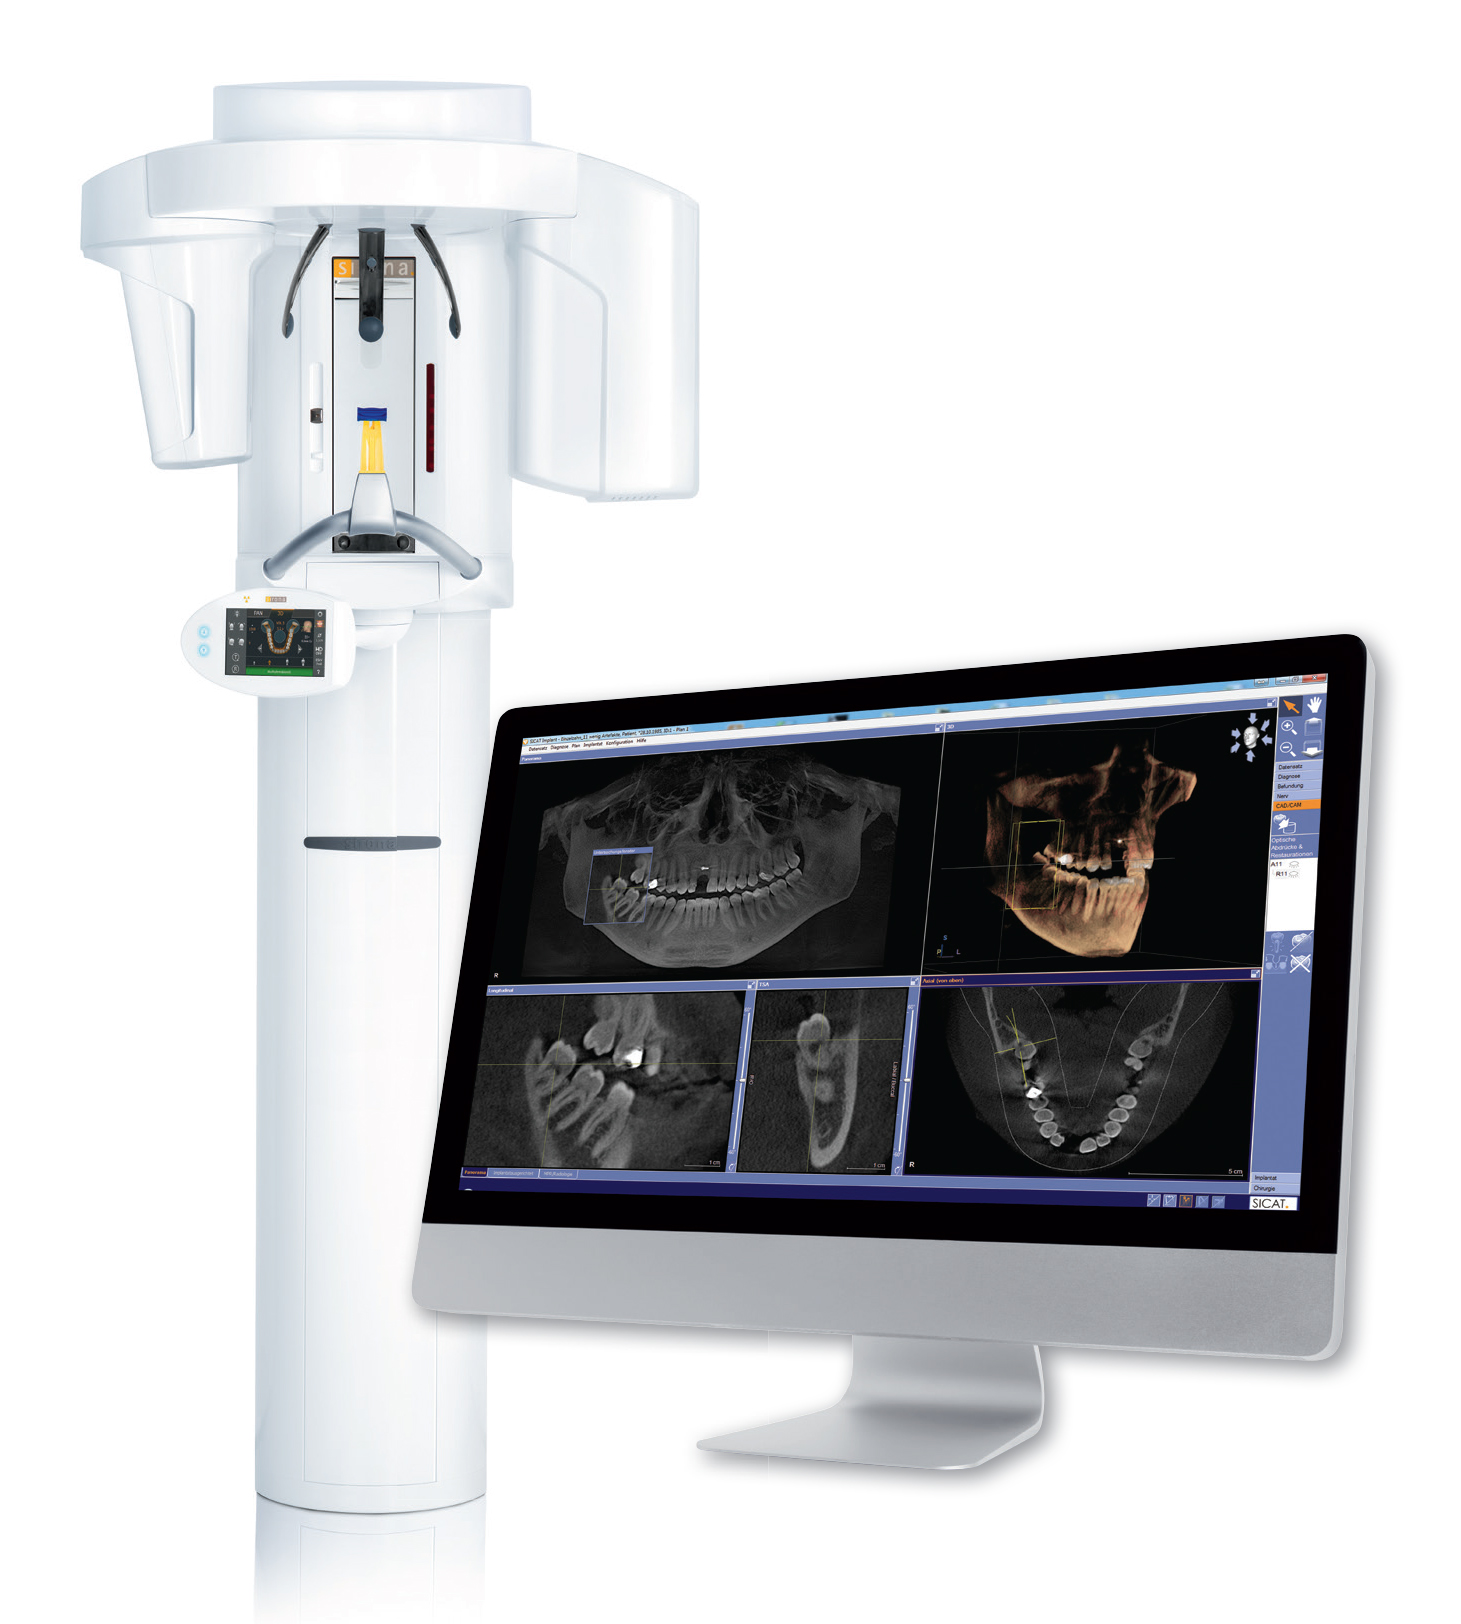 Dentsply Sirona Offers the Complete Imaging Solution for